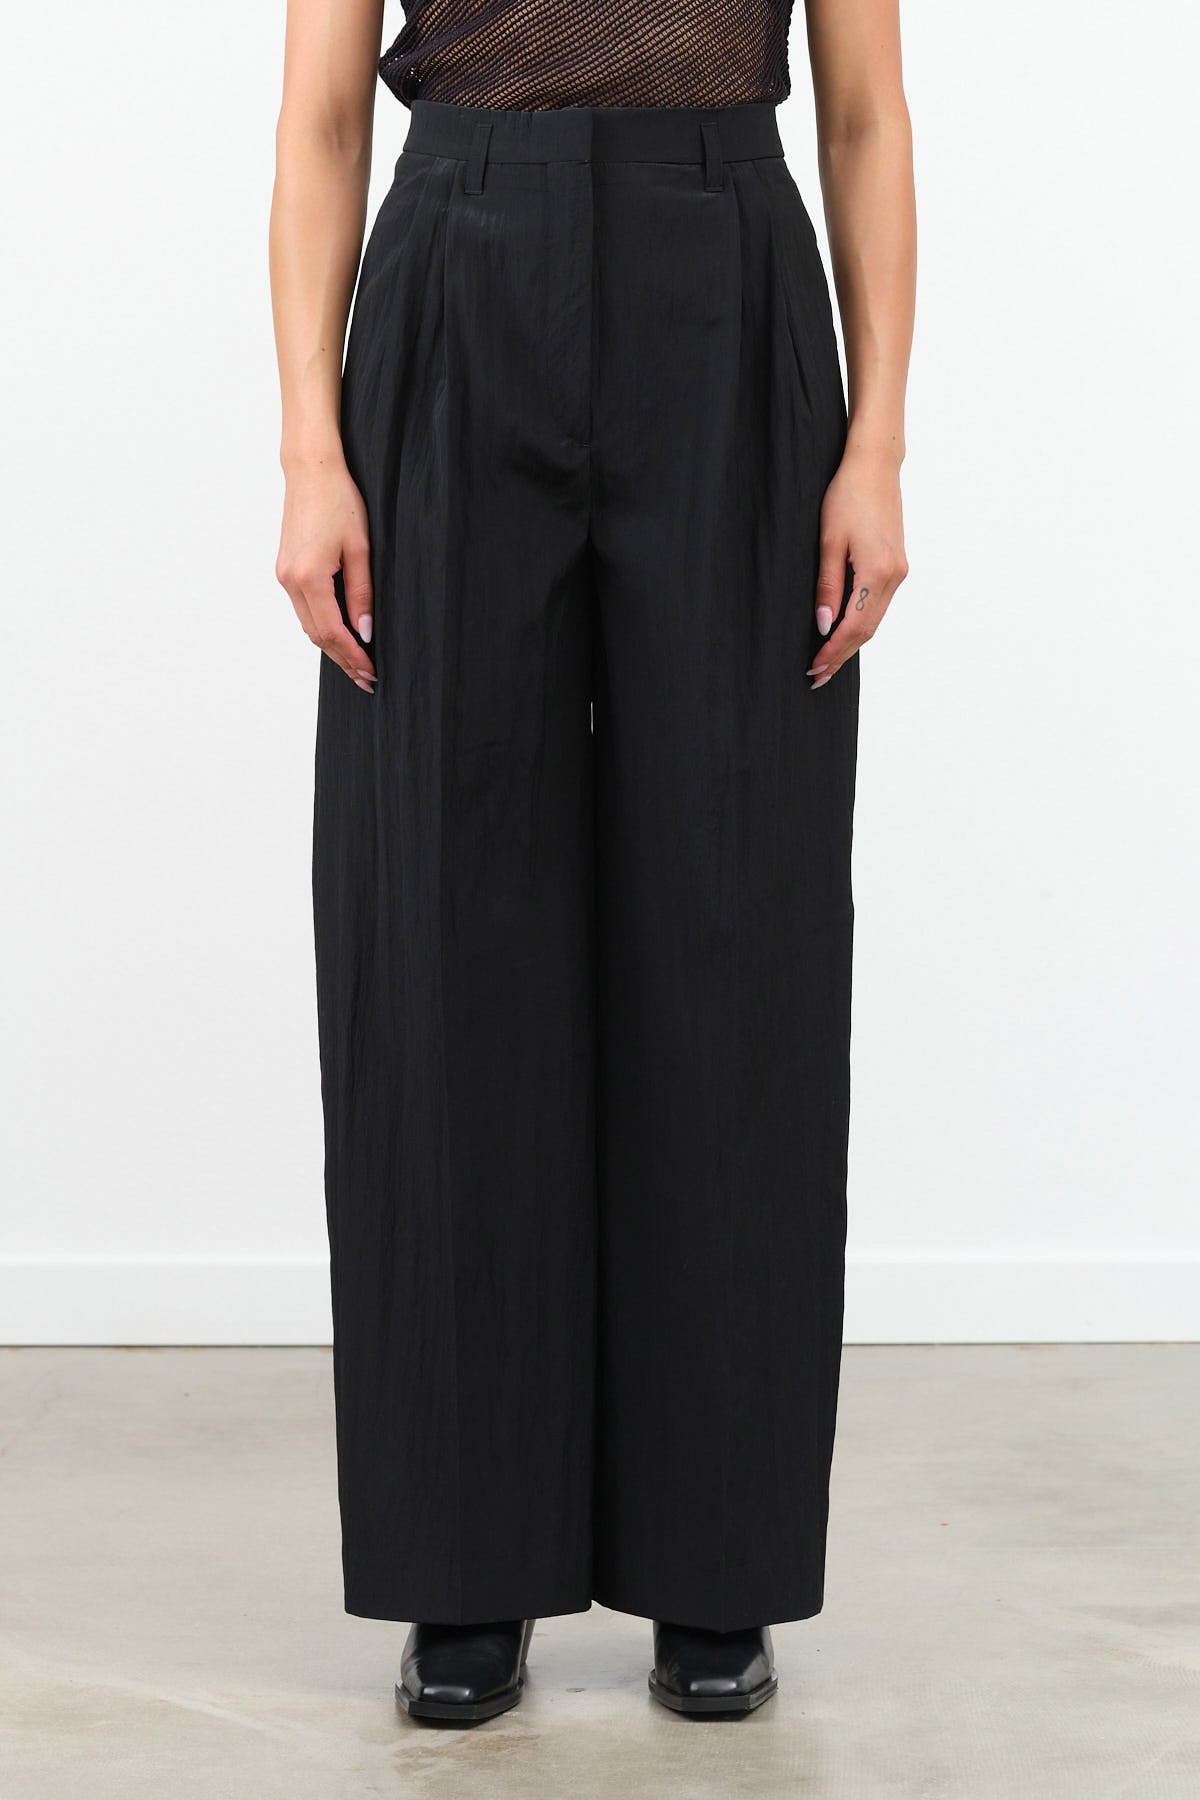 Parise Pant in Black by Christian Wijnants